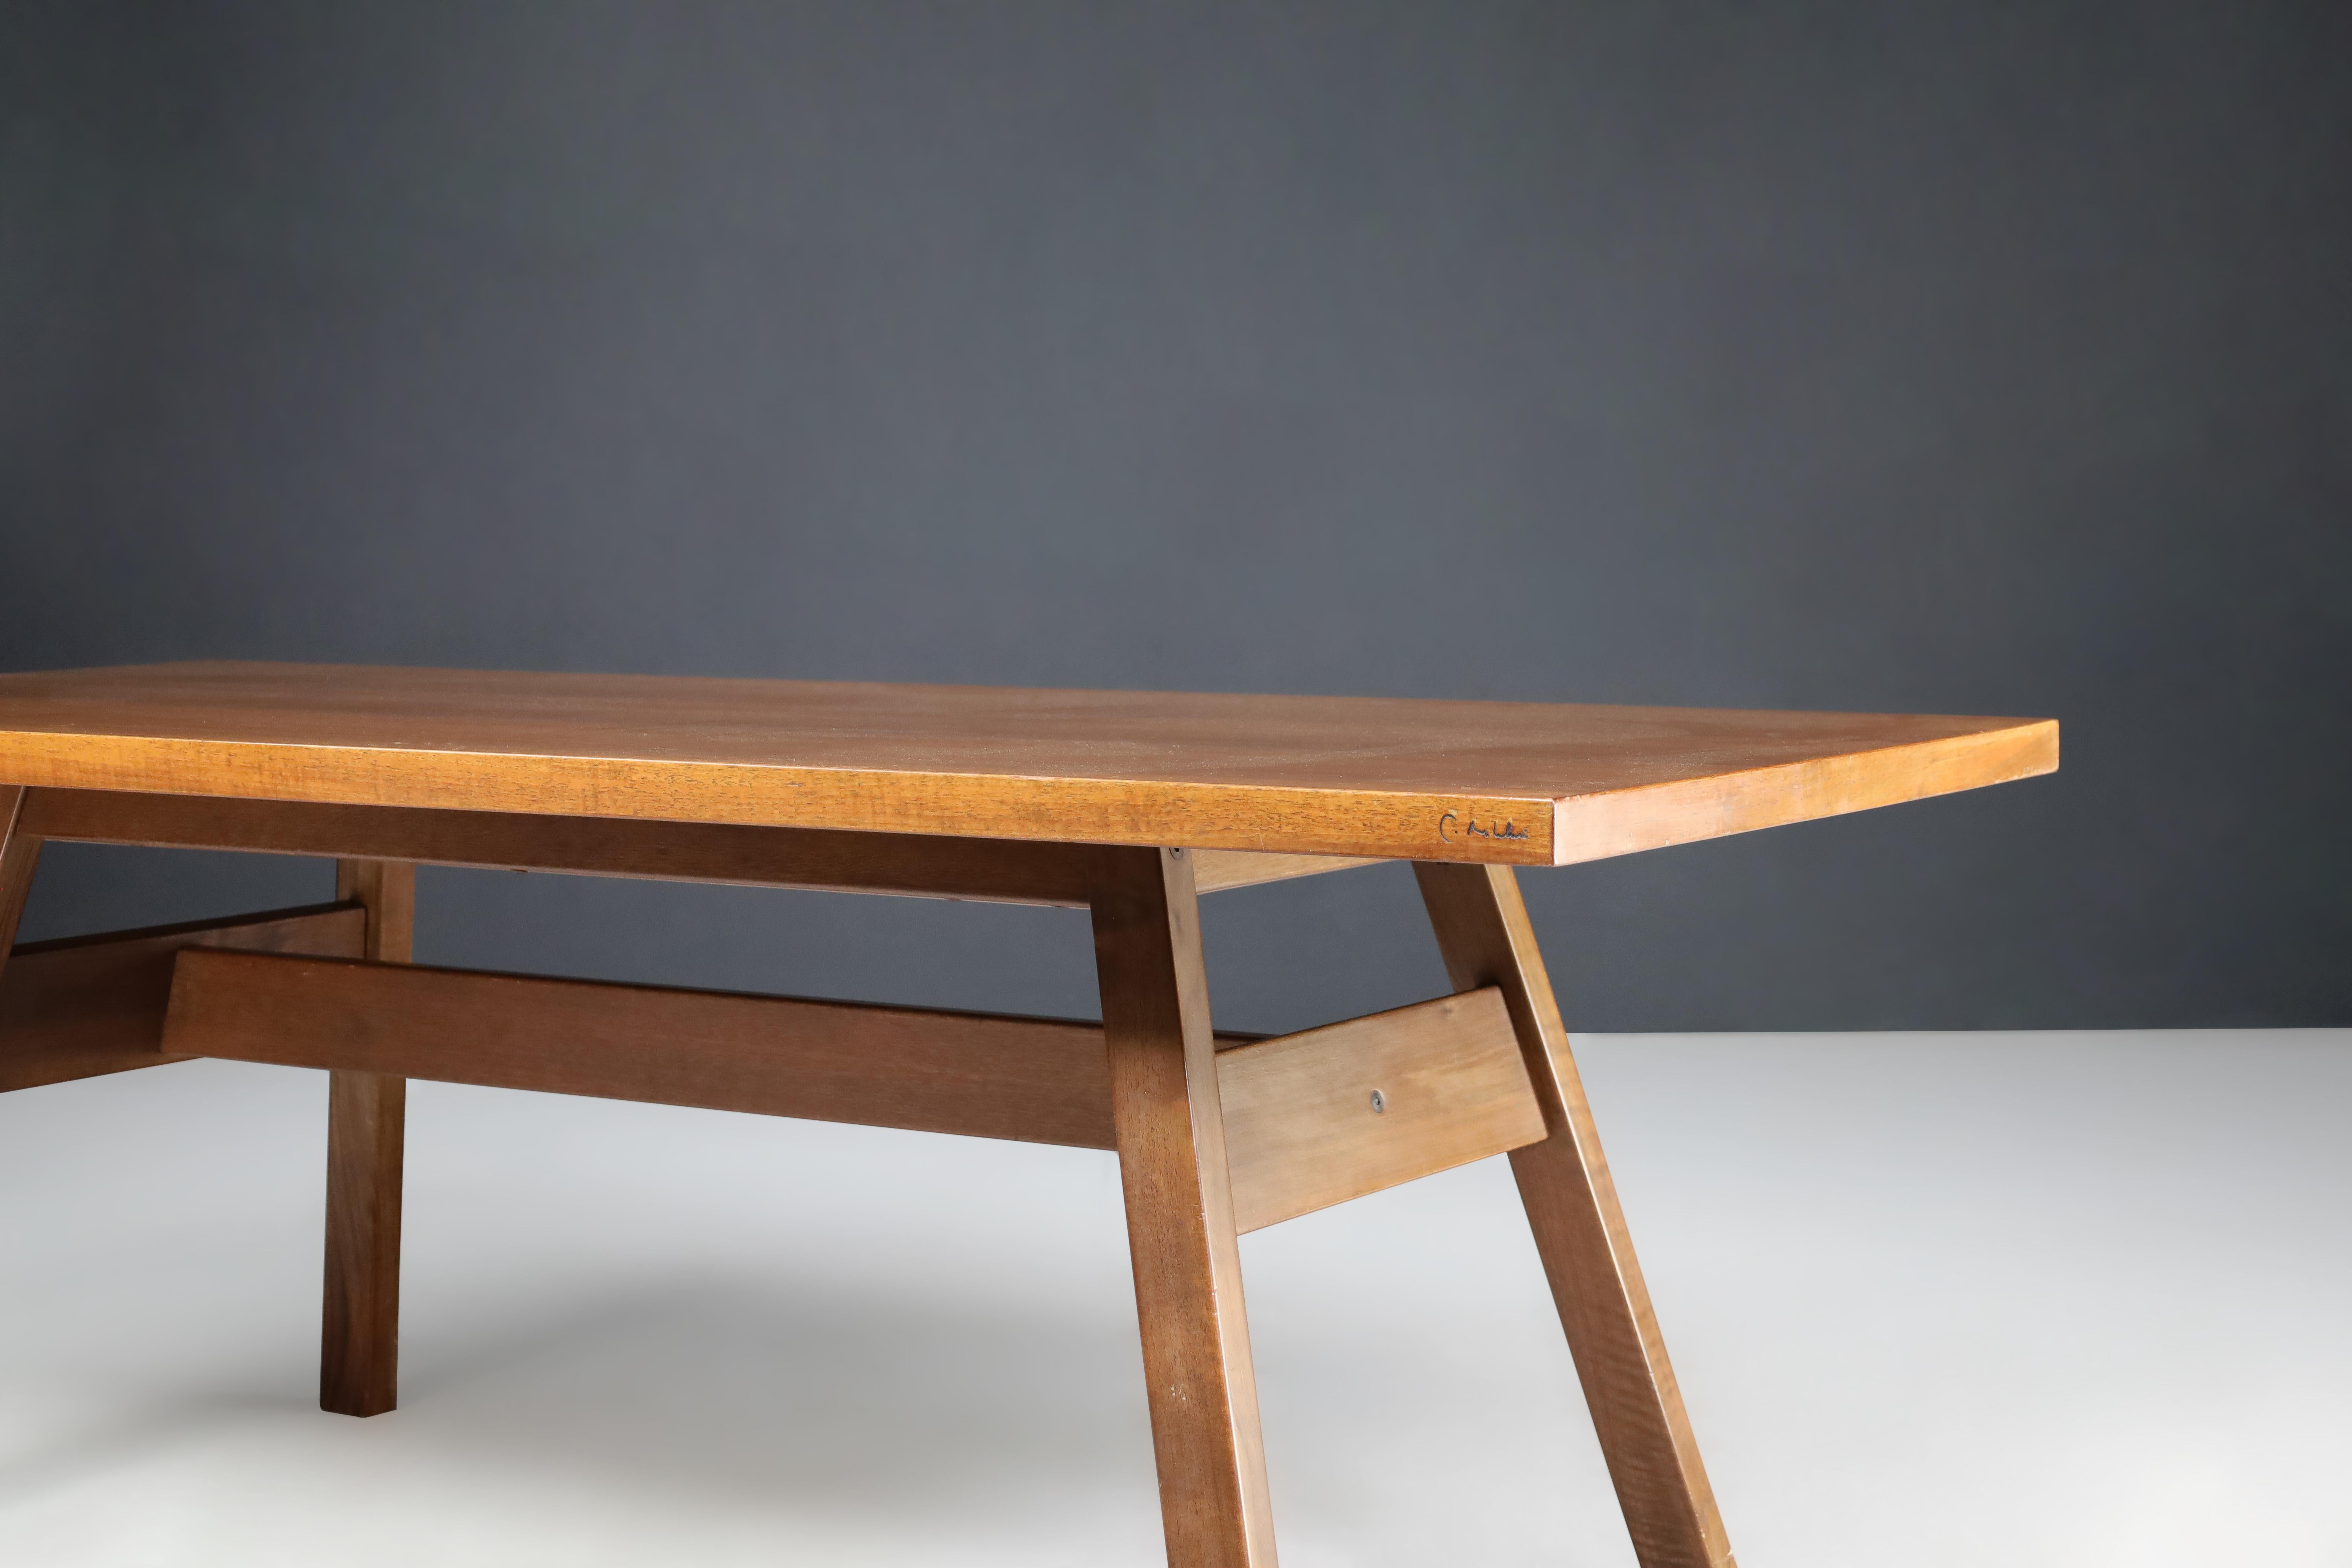 Giovanni Michelucci Walnut Dining Room Table for Poltronova, Italy, 1964 For Sale 1